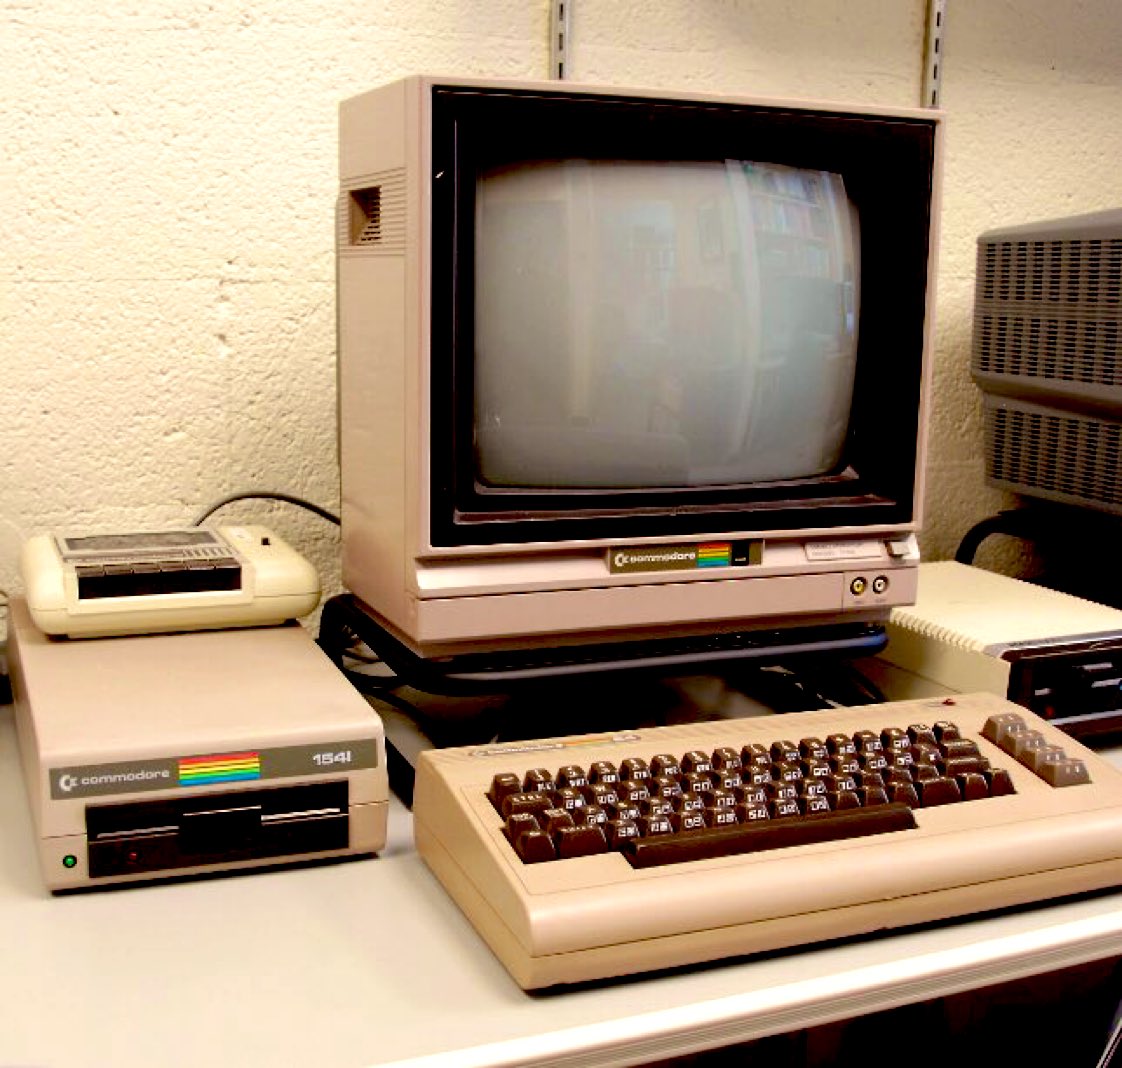 38 years ago today, the Commodore 64 was first revealed at the Consumer Electronics Show, in Las Vegas (1982). Retweet if you loved yours...